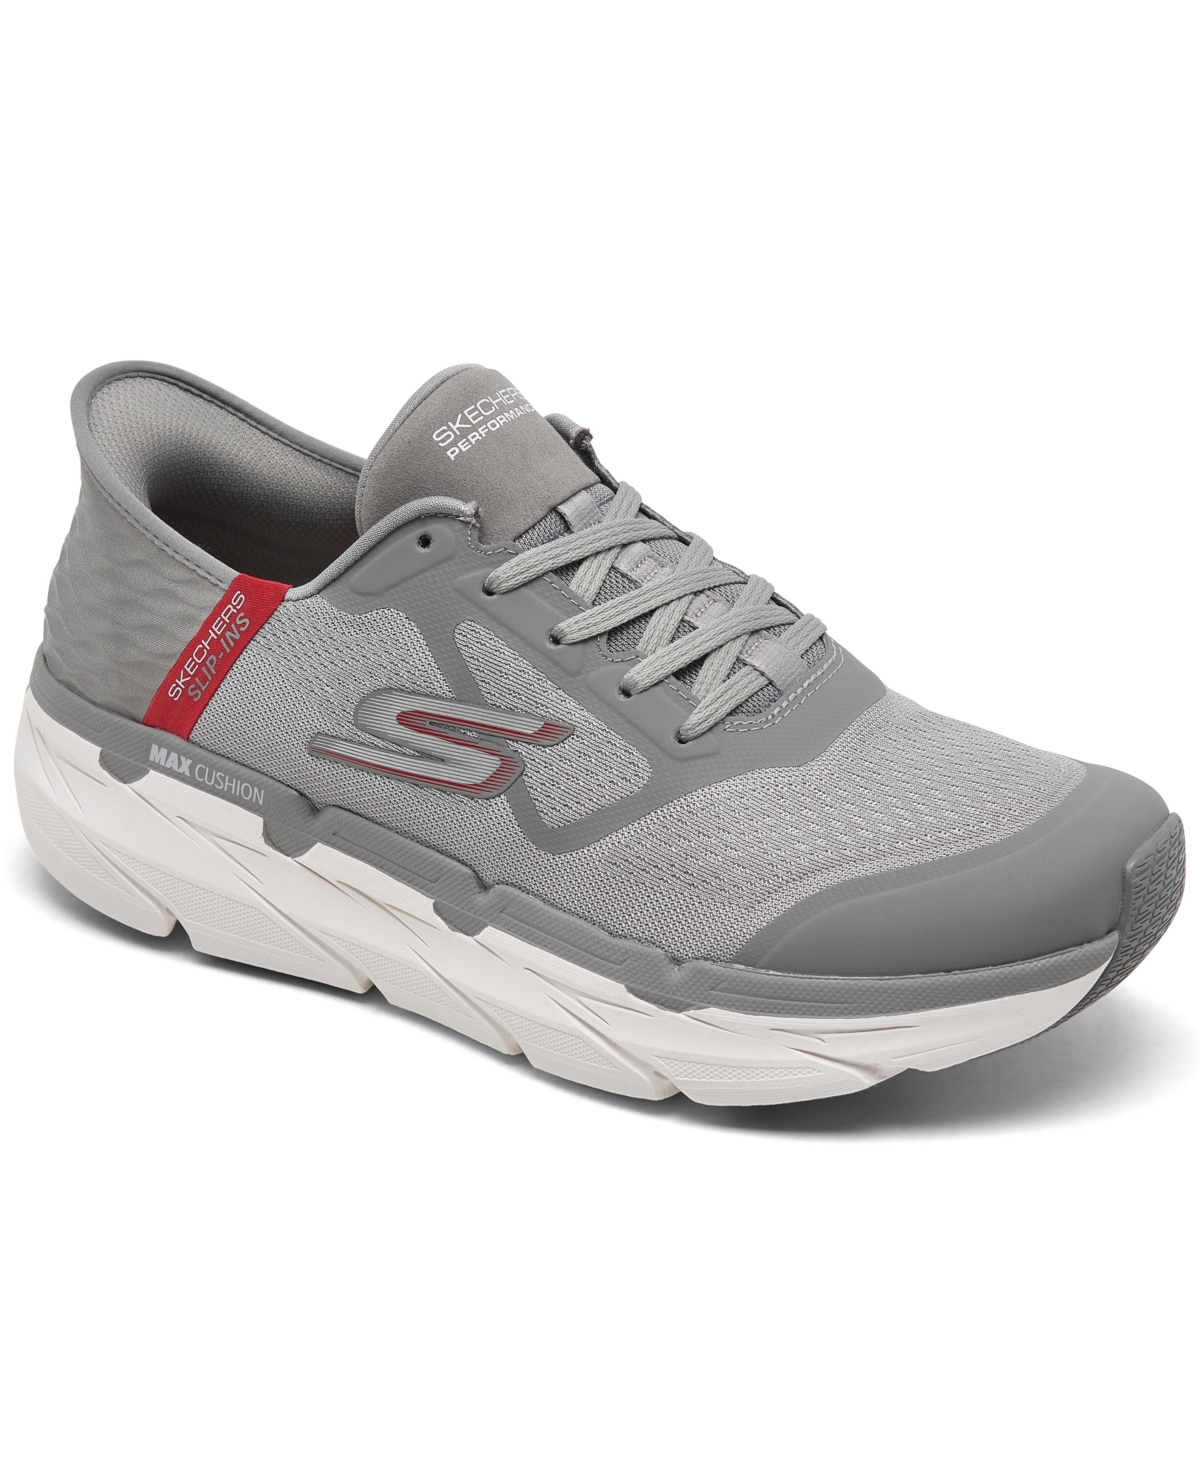 Men's Max Cushioning Premier Running and Walking Sneakers from Finish Line - Grey/Red